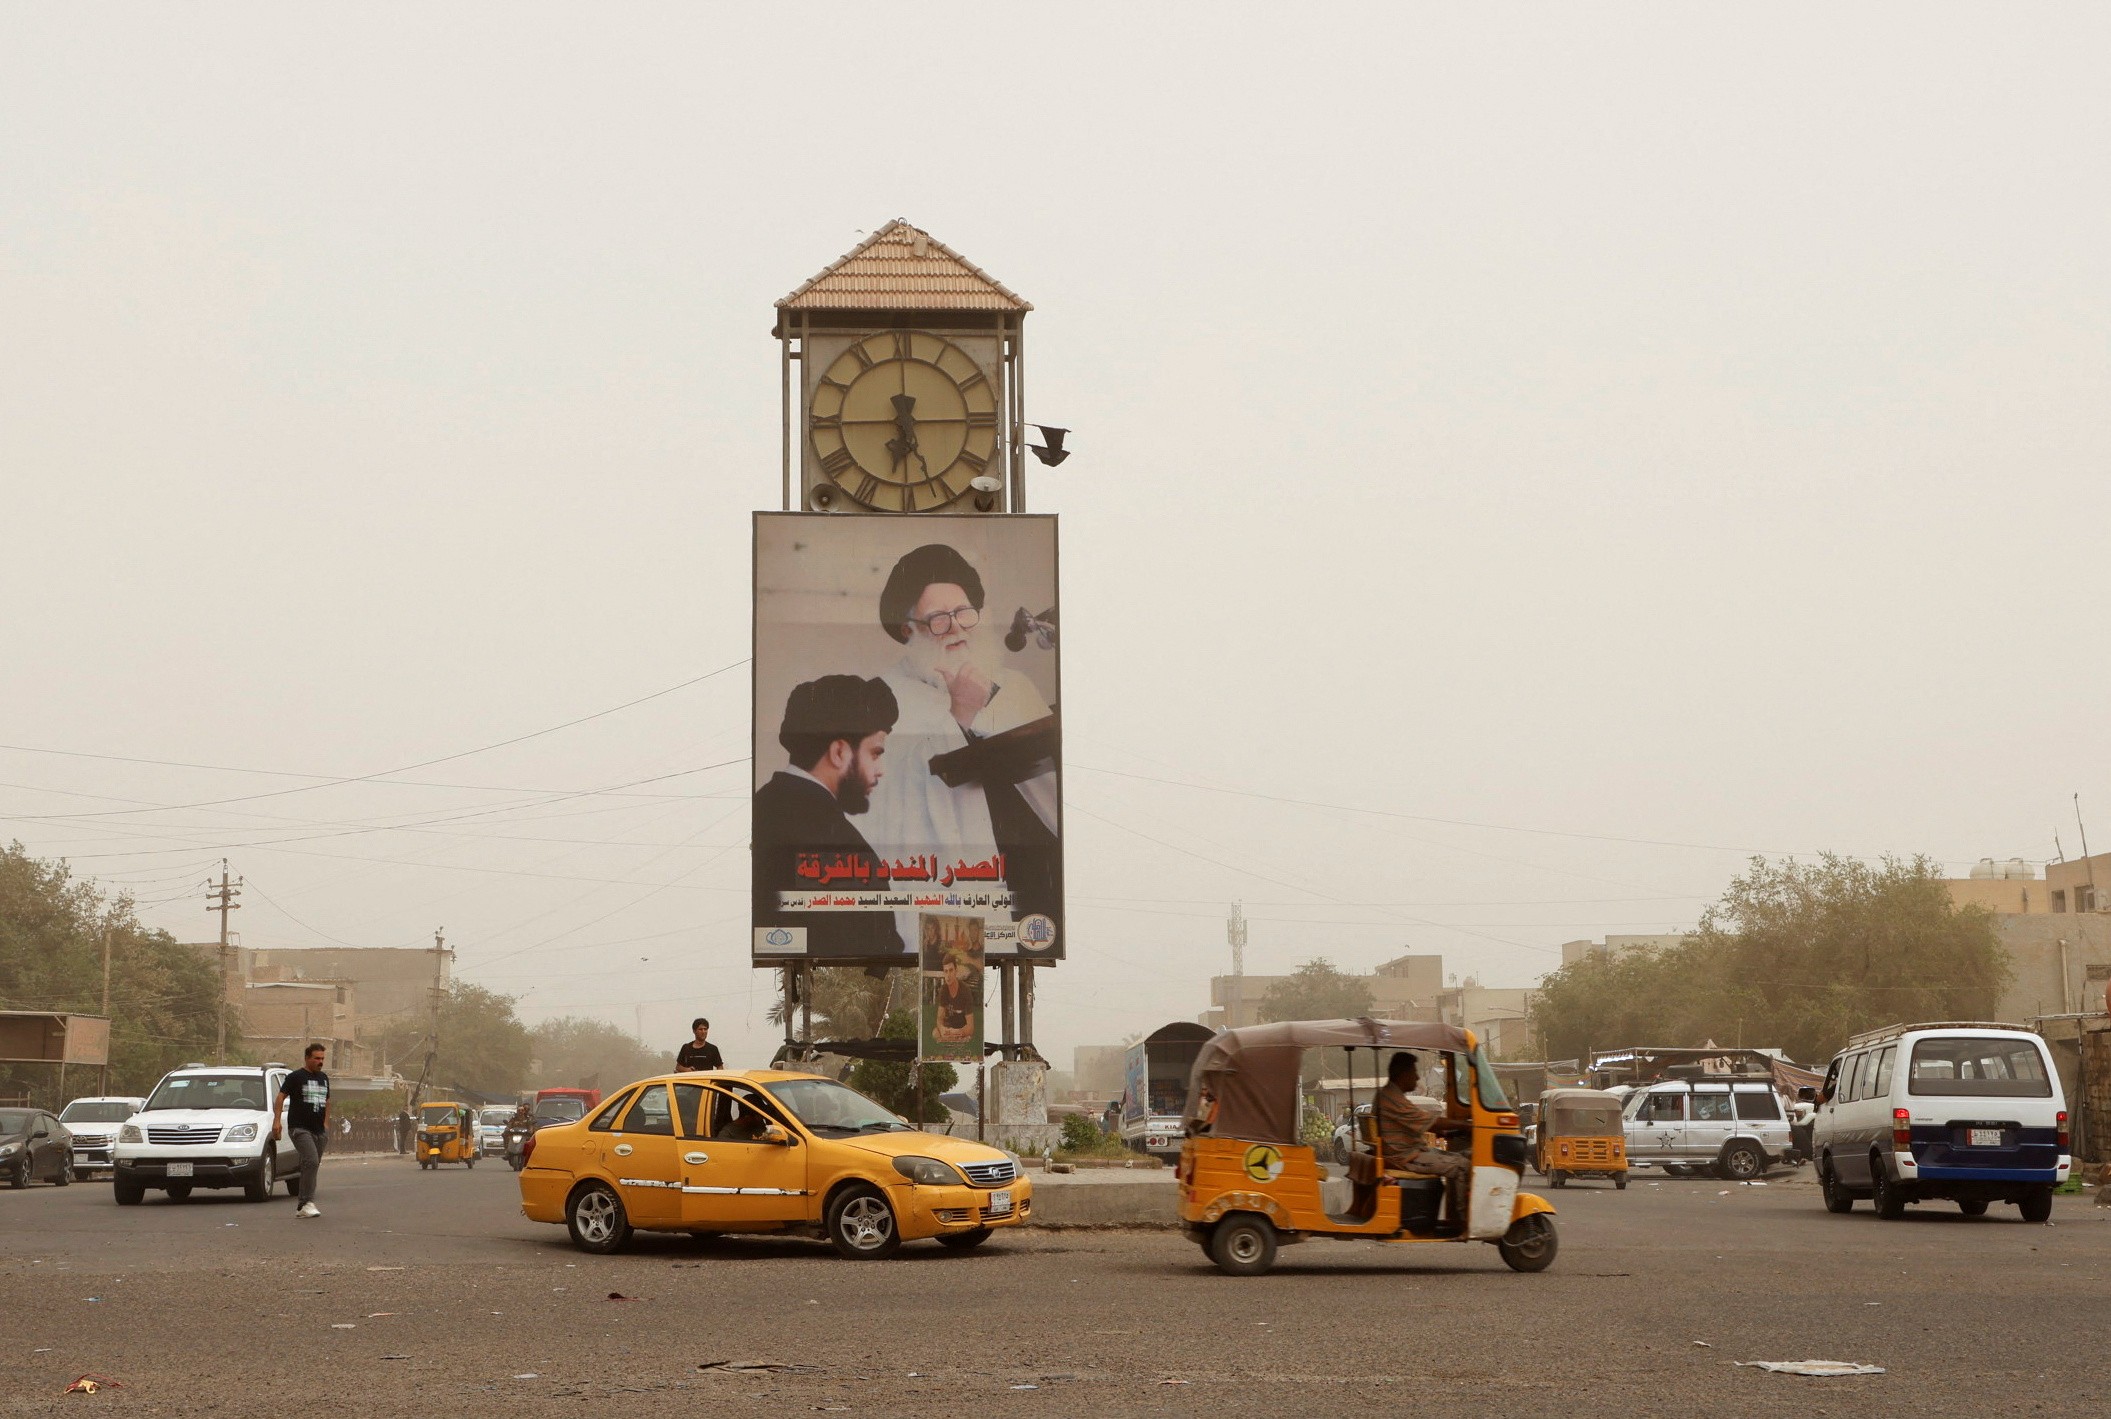 A poster of the late Grand Ayatollah Mohammed Sadiq al-Sadr and his son Muqtada al-Sadr is pictured in the Sadr City district of Baghdad (Reuters)